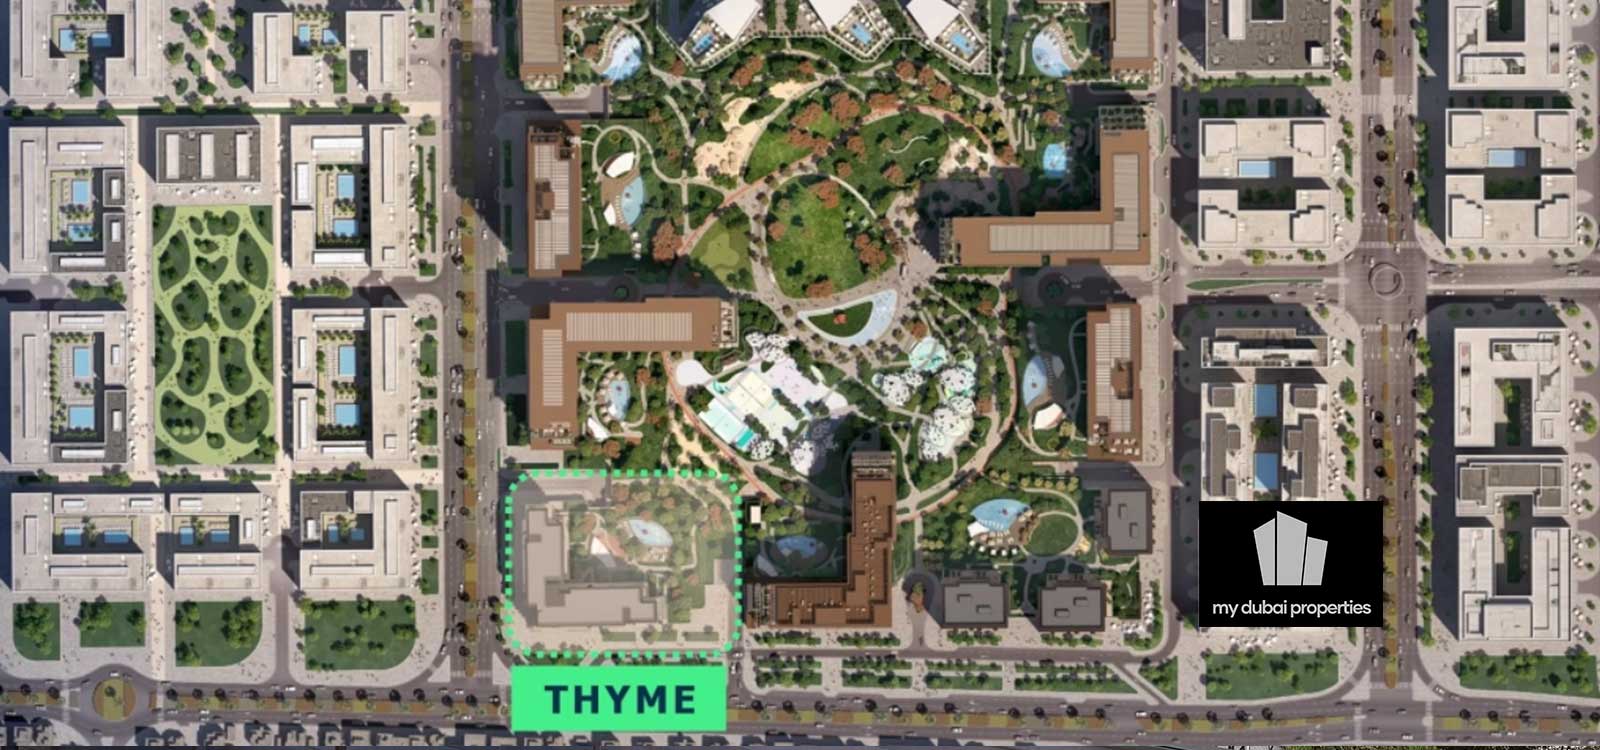 Thyme Central Park Master Plan